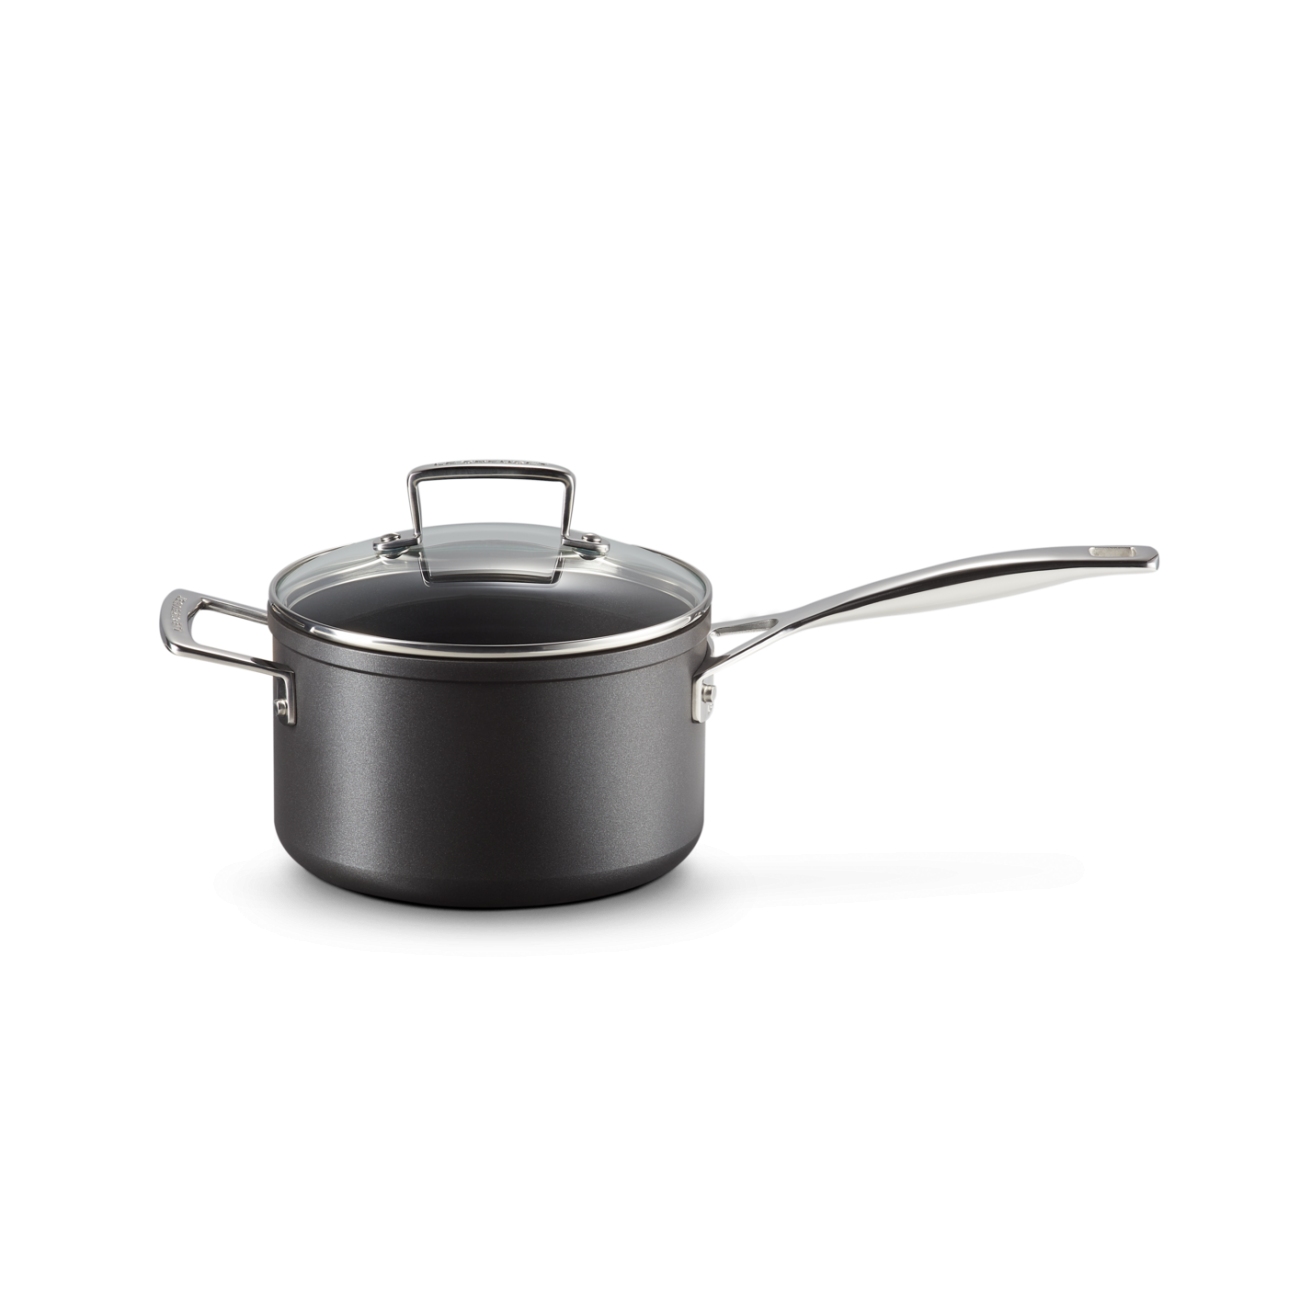 Le Creuset Non-Stick Saucepan with handle and Glass Lid 18